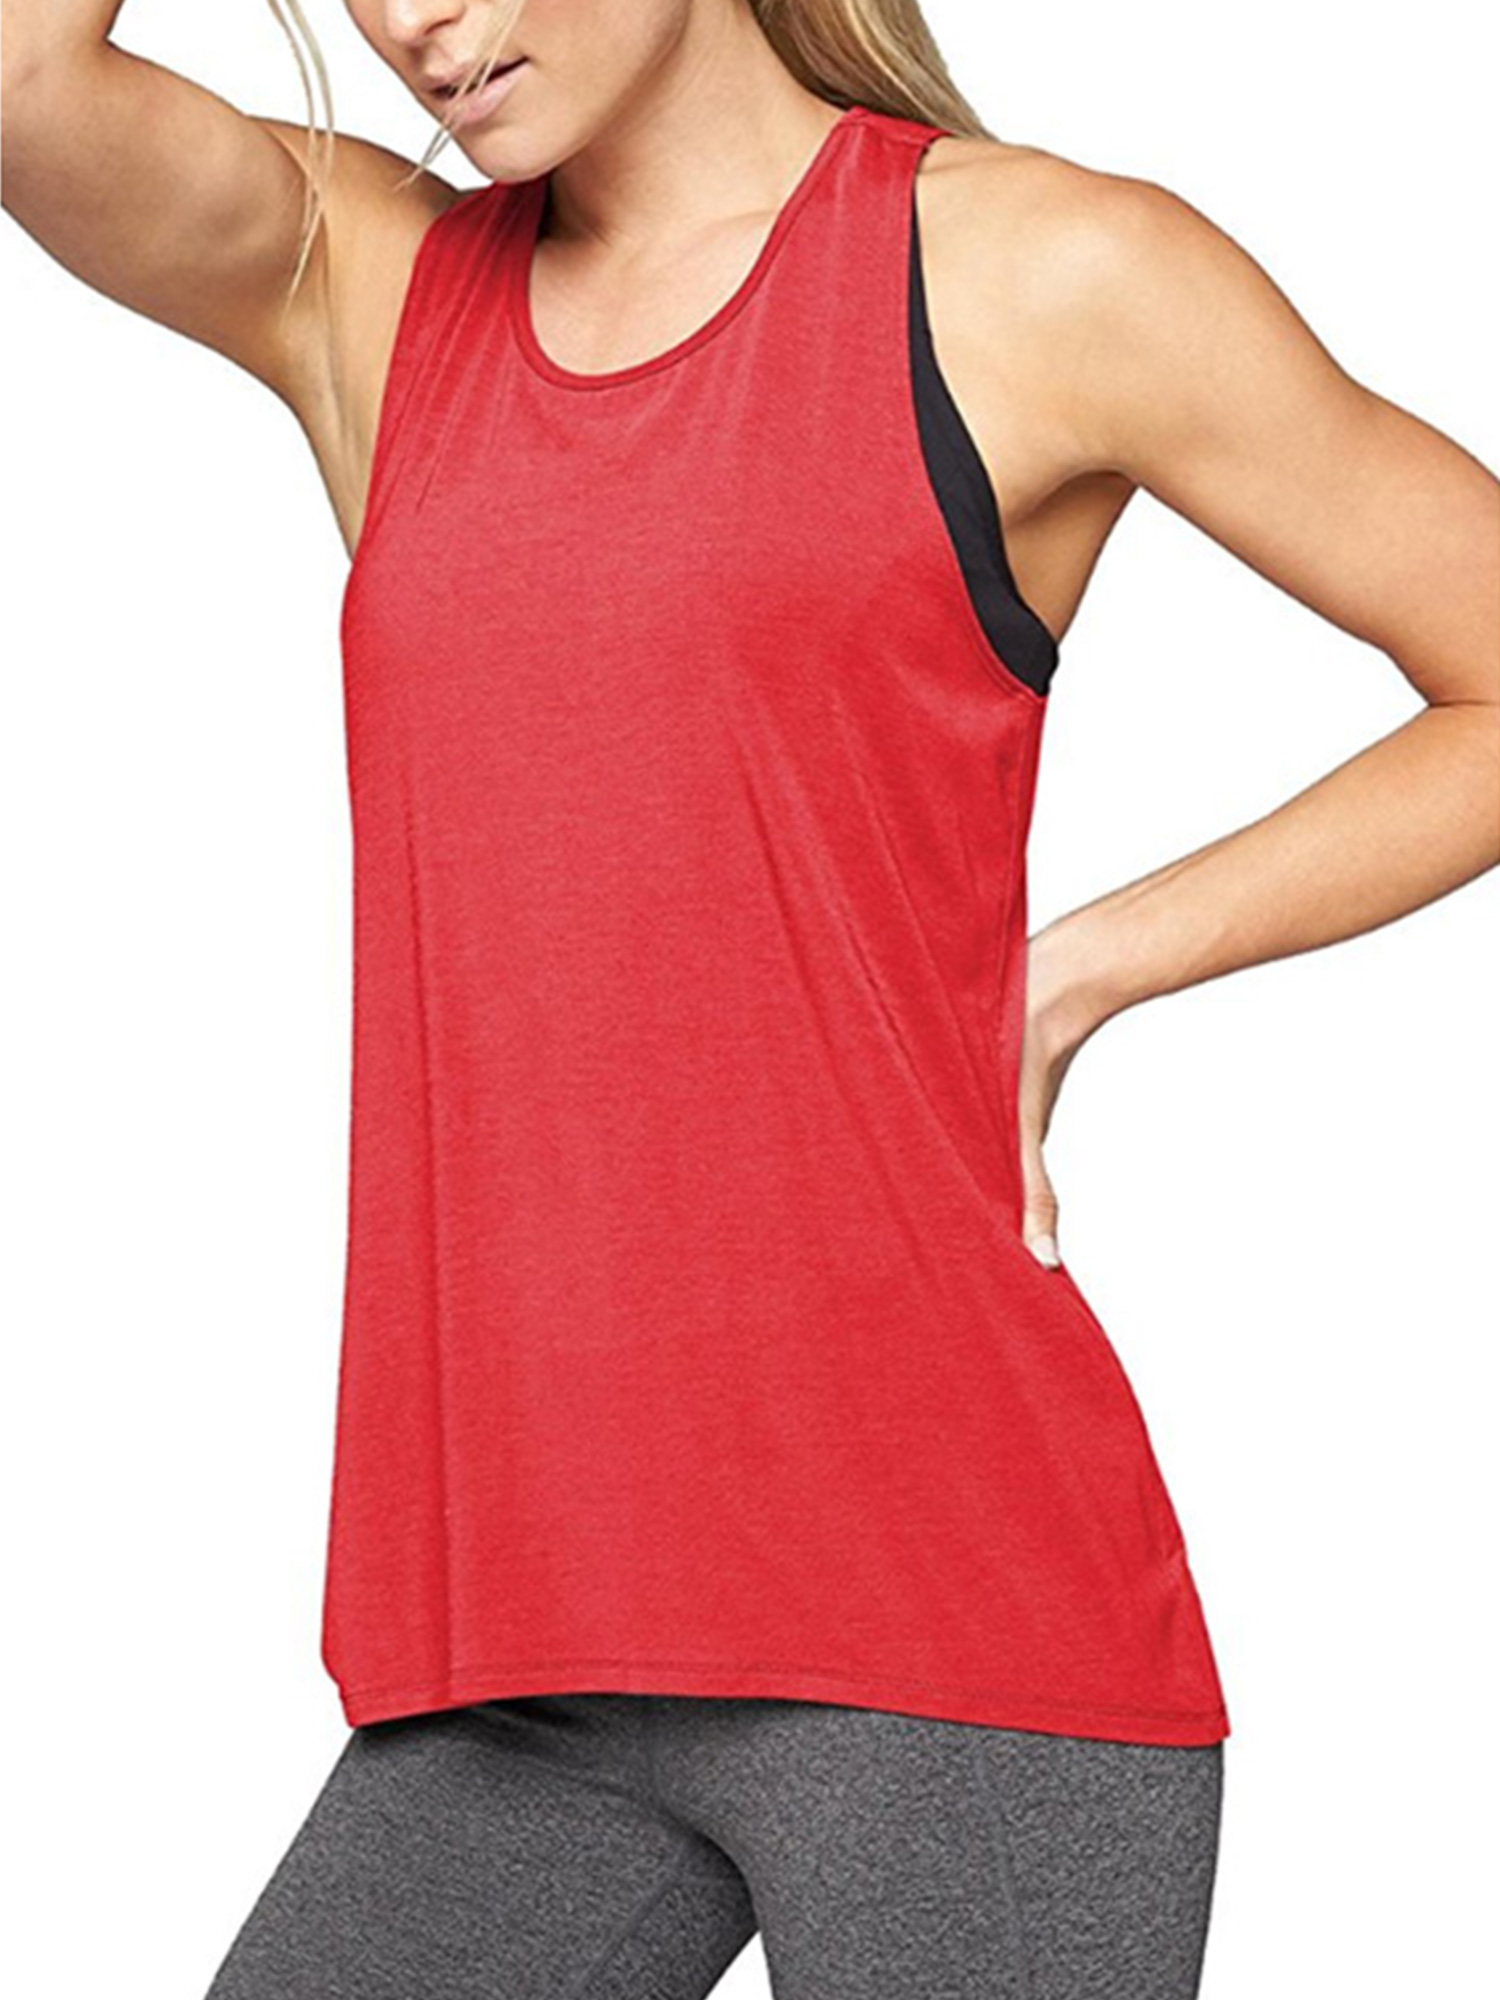 Workout Vest Tank Tops for Women Activewear Running Fitness Muscle Tank Sport Exercise Gym Sport Yoga Tops Athletic Shirts - image 3 of 3